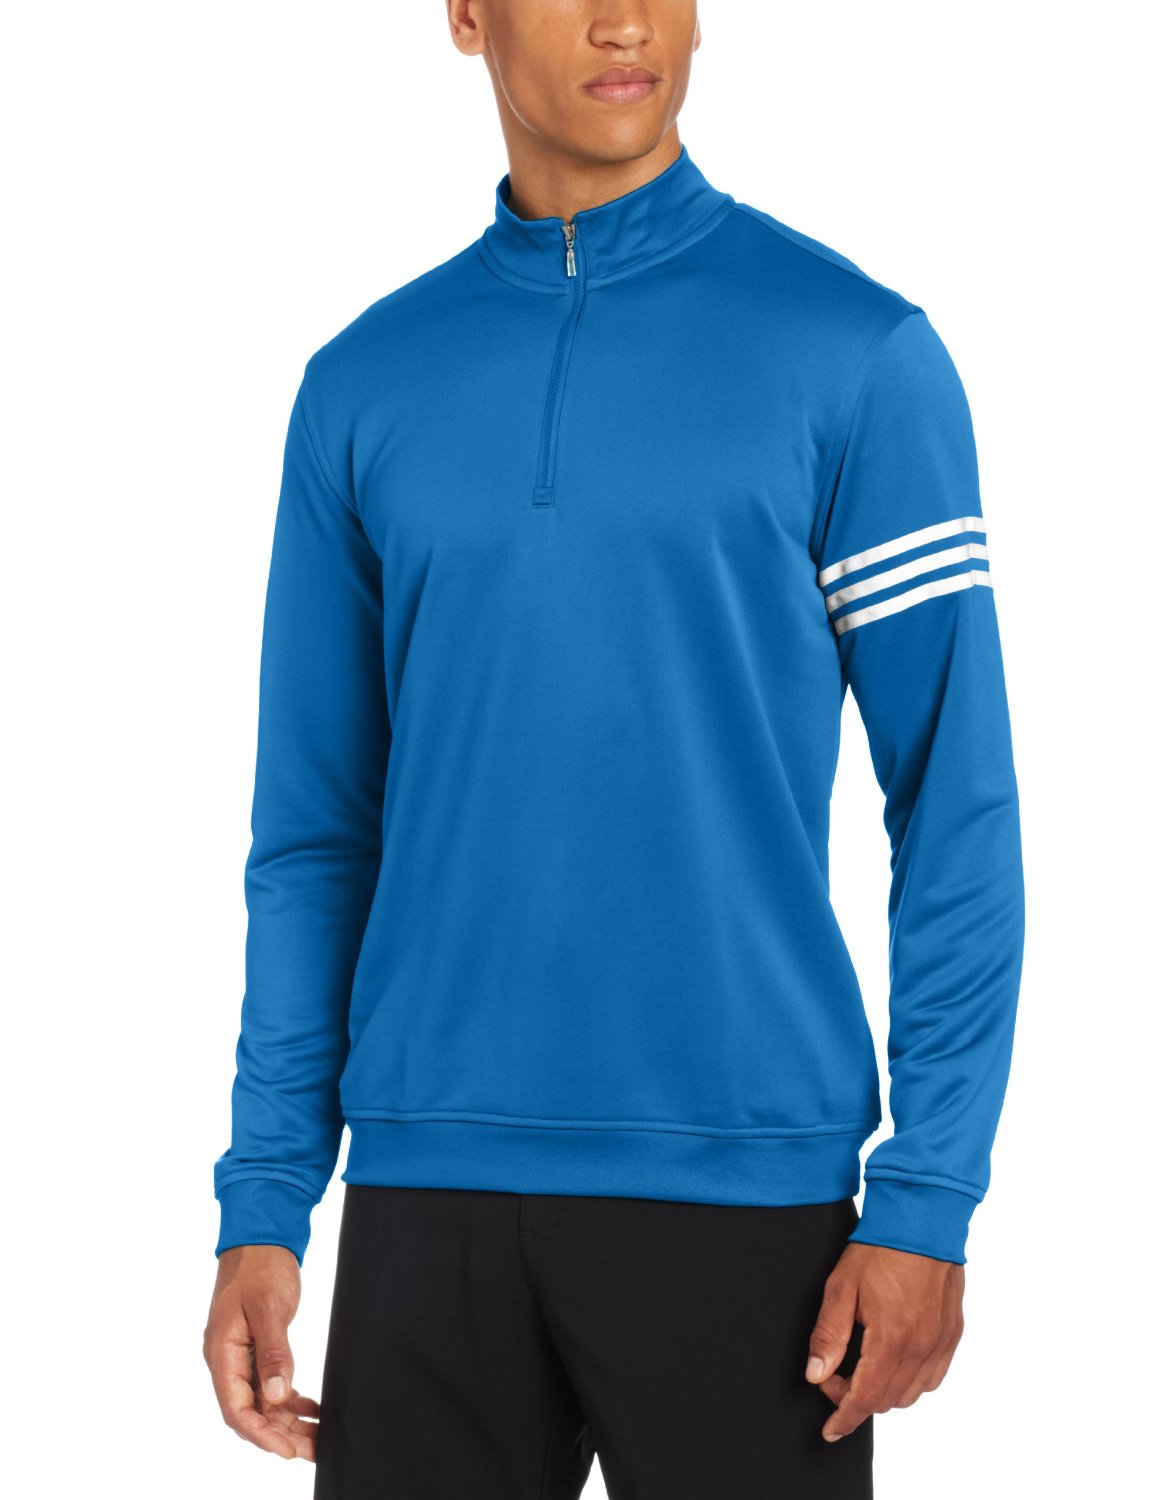 Mens Climalite Long Sleeve/Layering Golf Pullovers